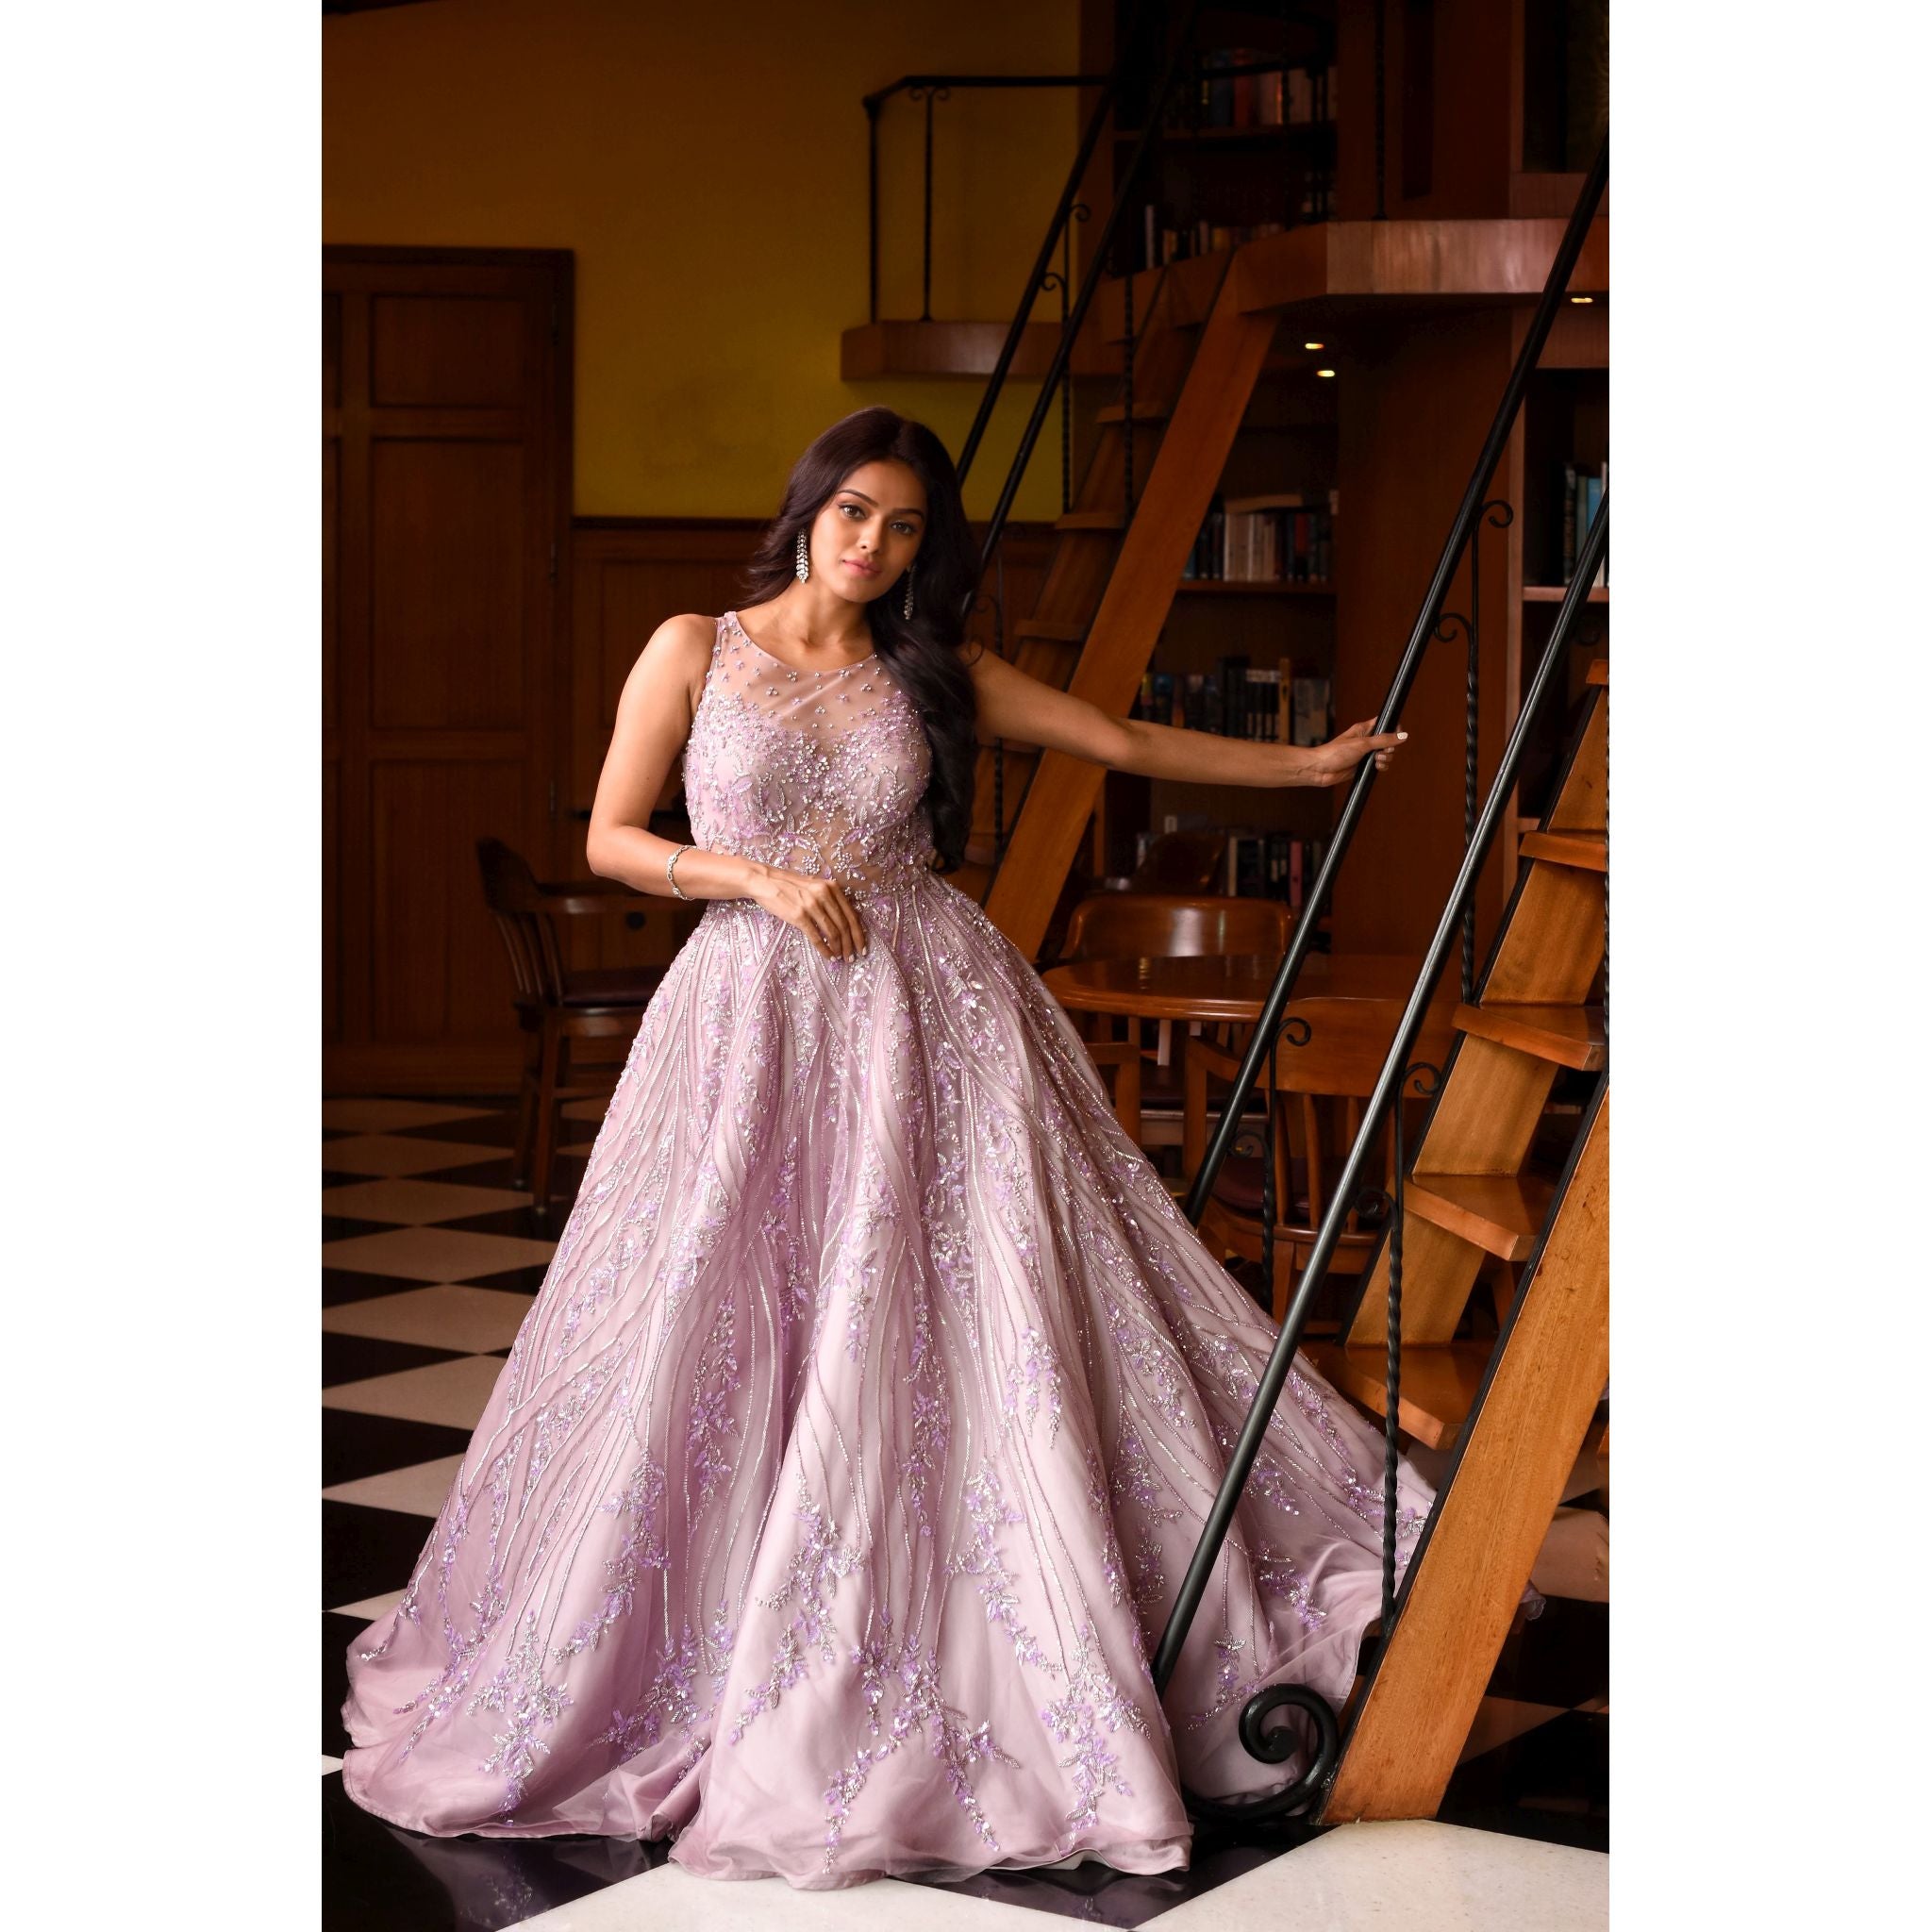 Womens Gowns Best Womens Gowns for Weddings in India  The Economic Times